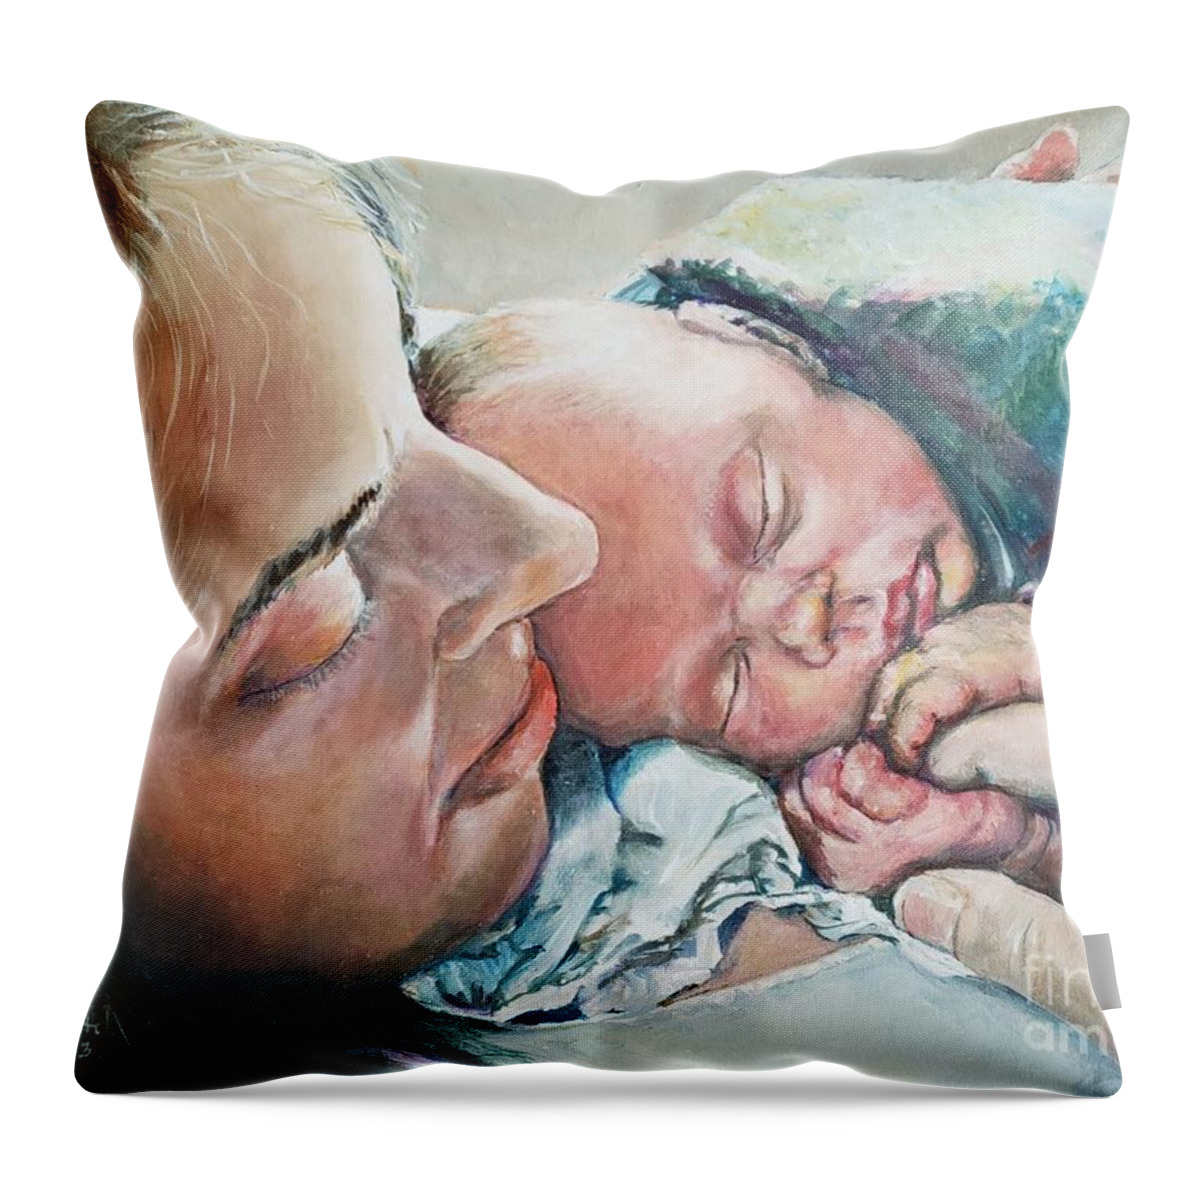 Mother Throw Pillow featuring the painting Tender Moment by Merana Cadorette